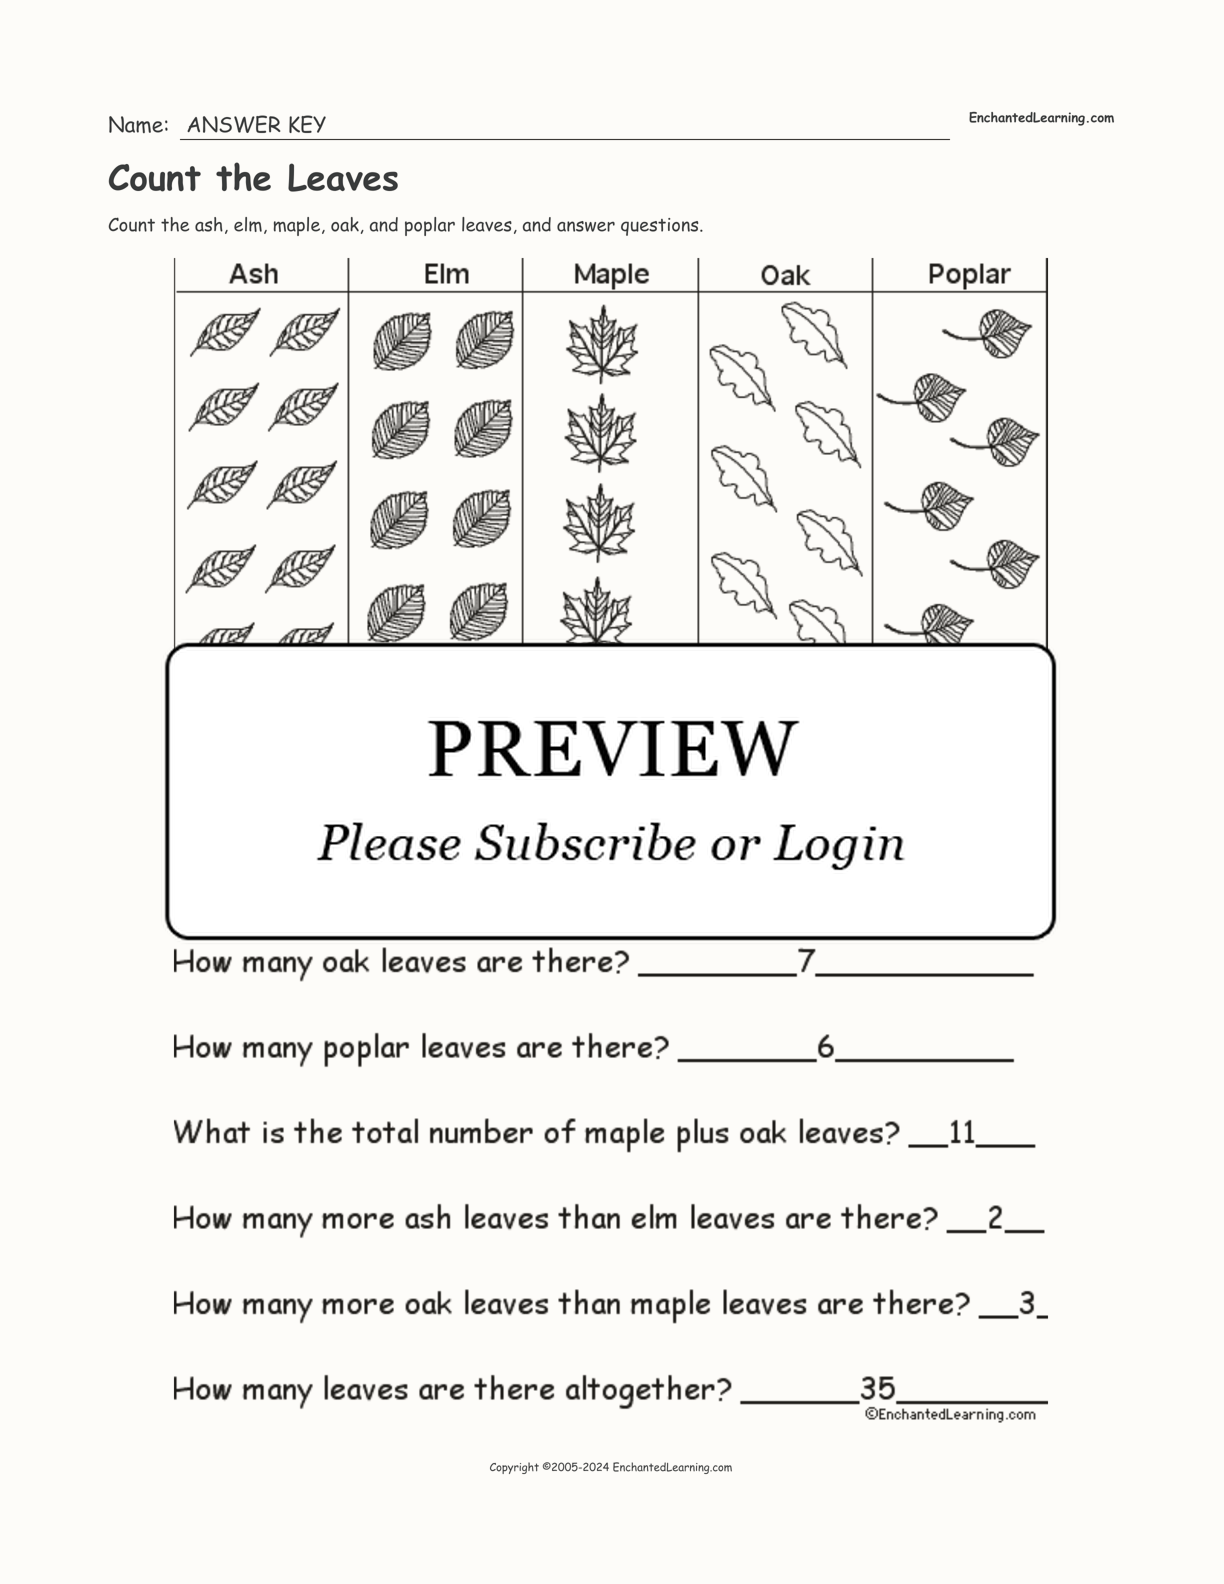 Count the Leaves interactive worksheet page 2